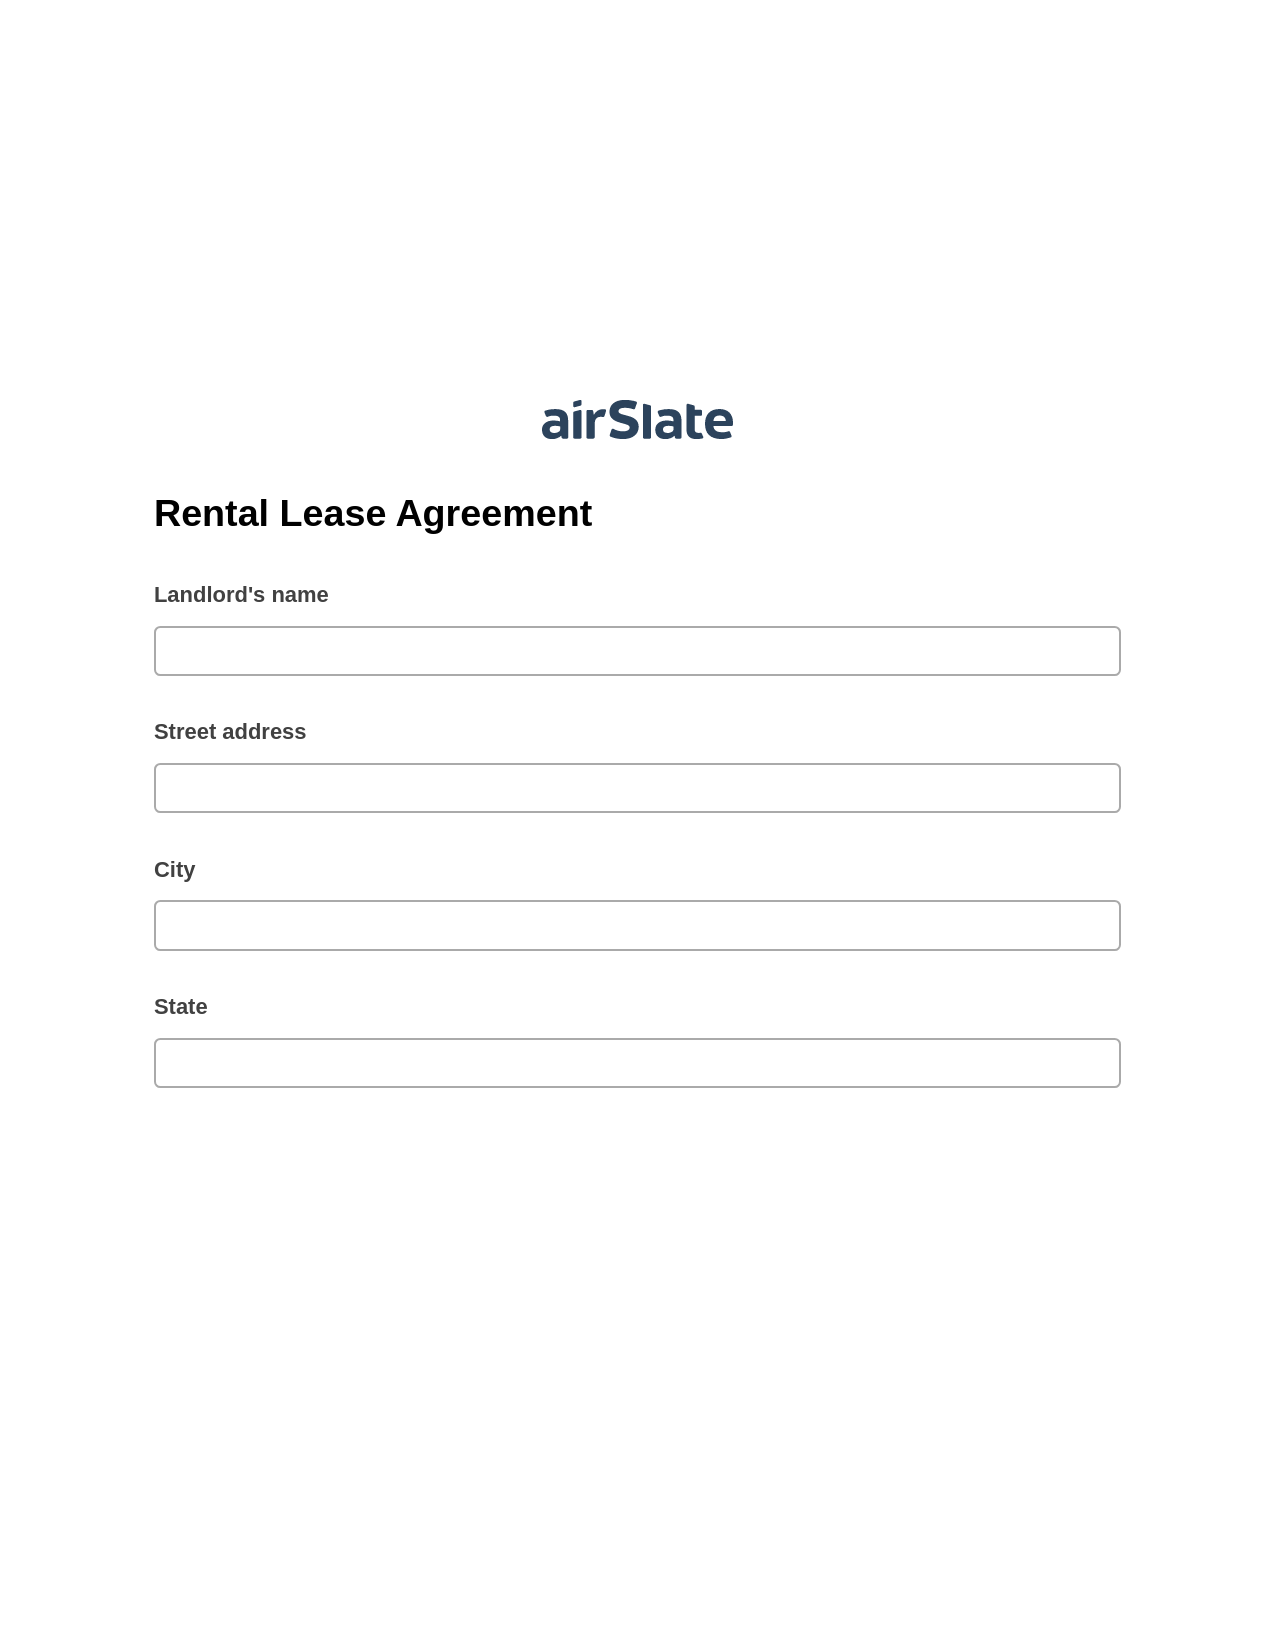 Rental Lease Agreement Pre-fill from Excel Spreadsheet Dropdown Options Bot, Remove Tags From Slate Bot, Export to Formstack Documents Bot